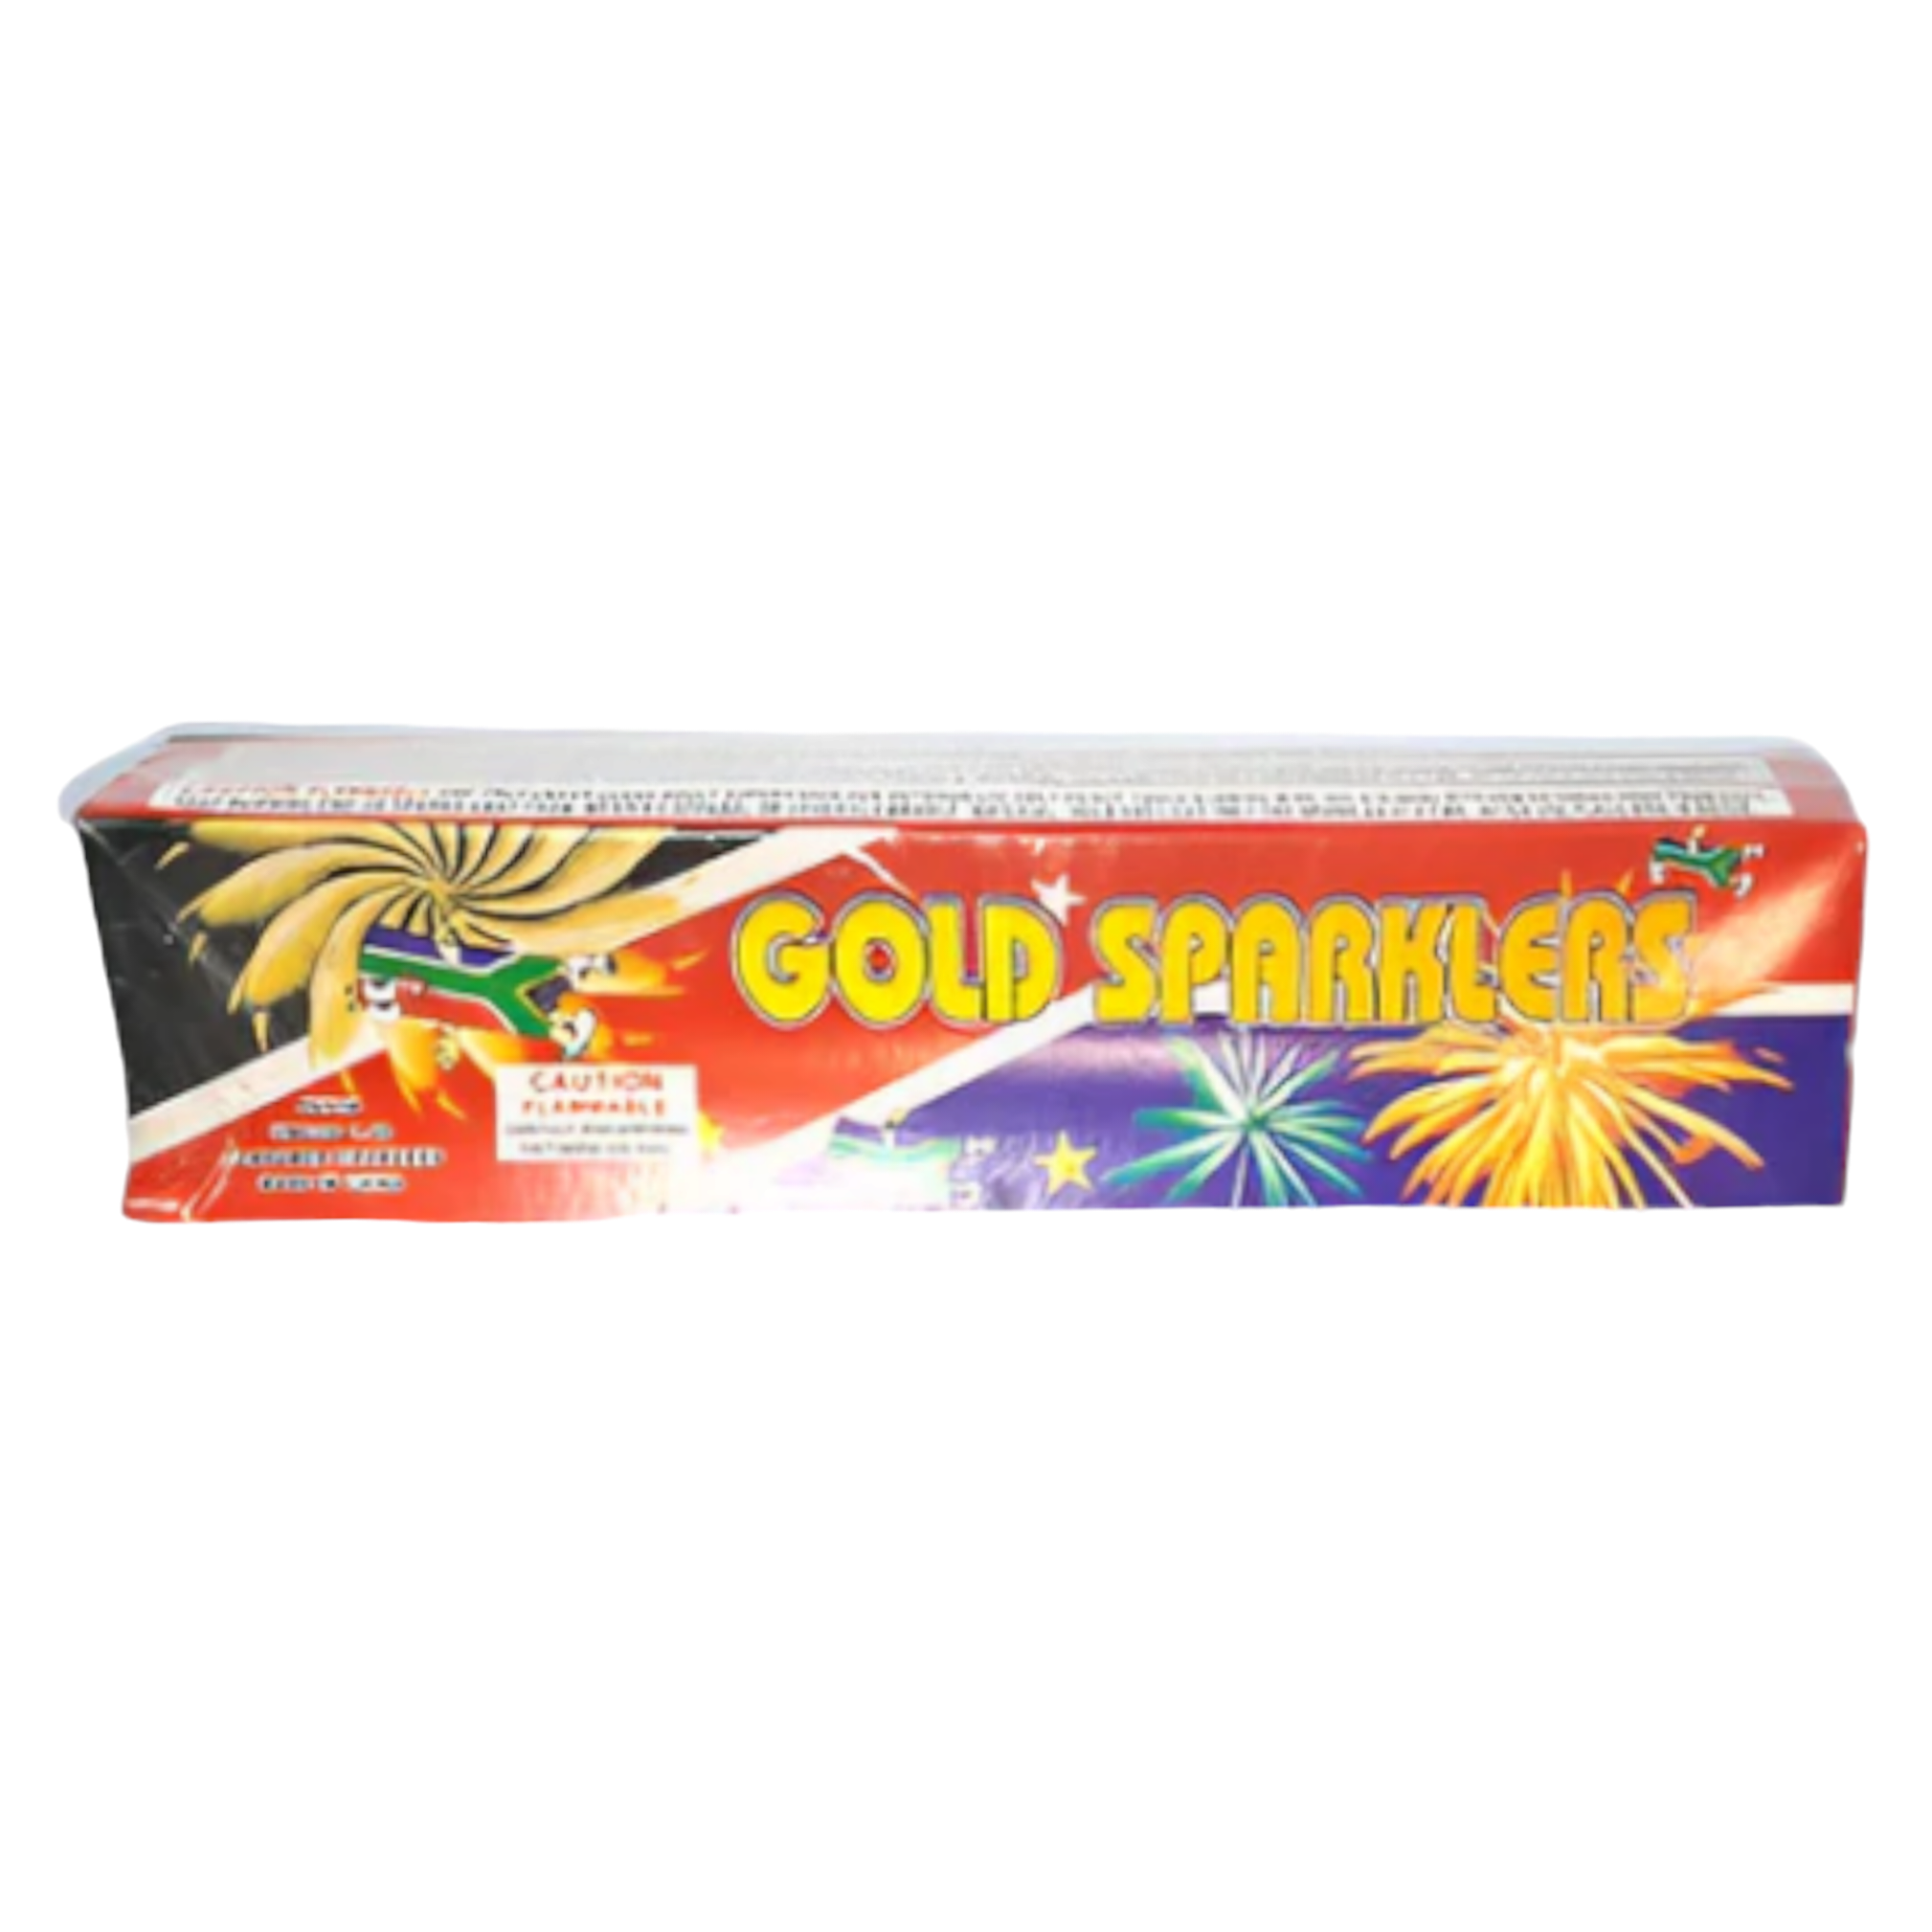 Party Sparklers Gold 10inch 6pc